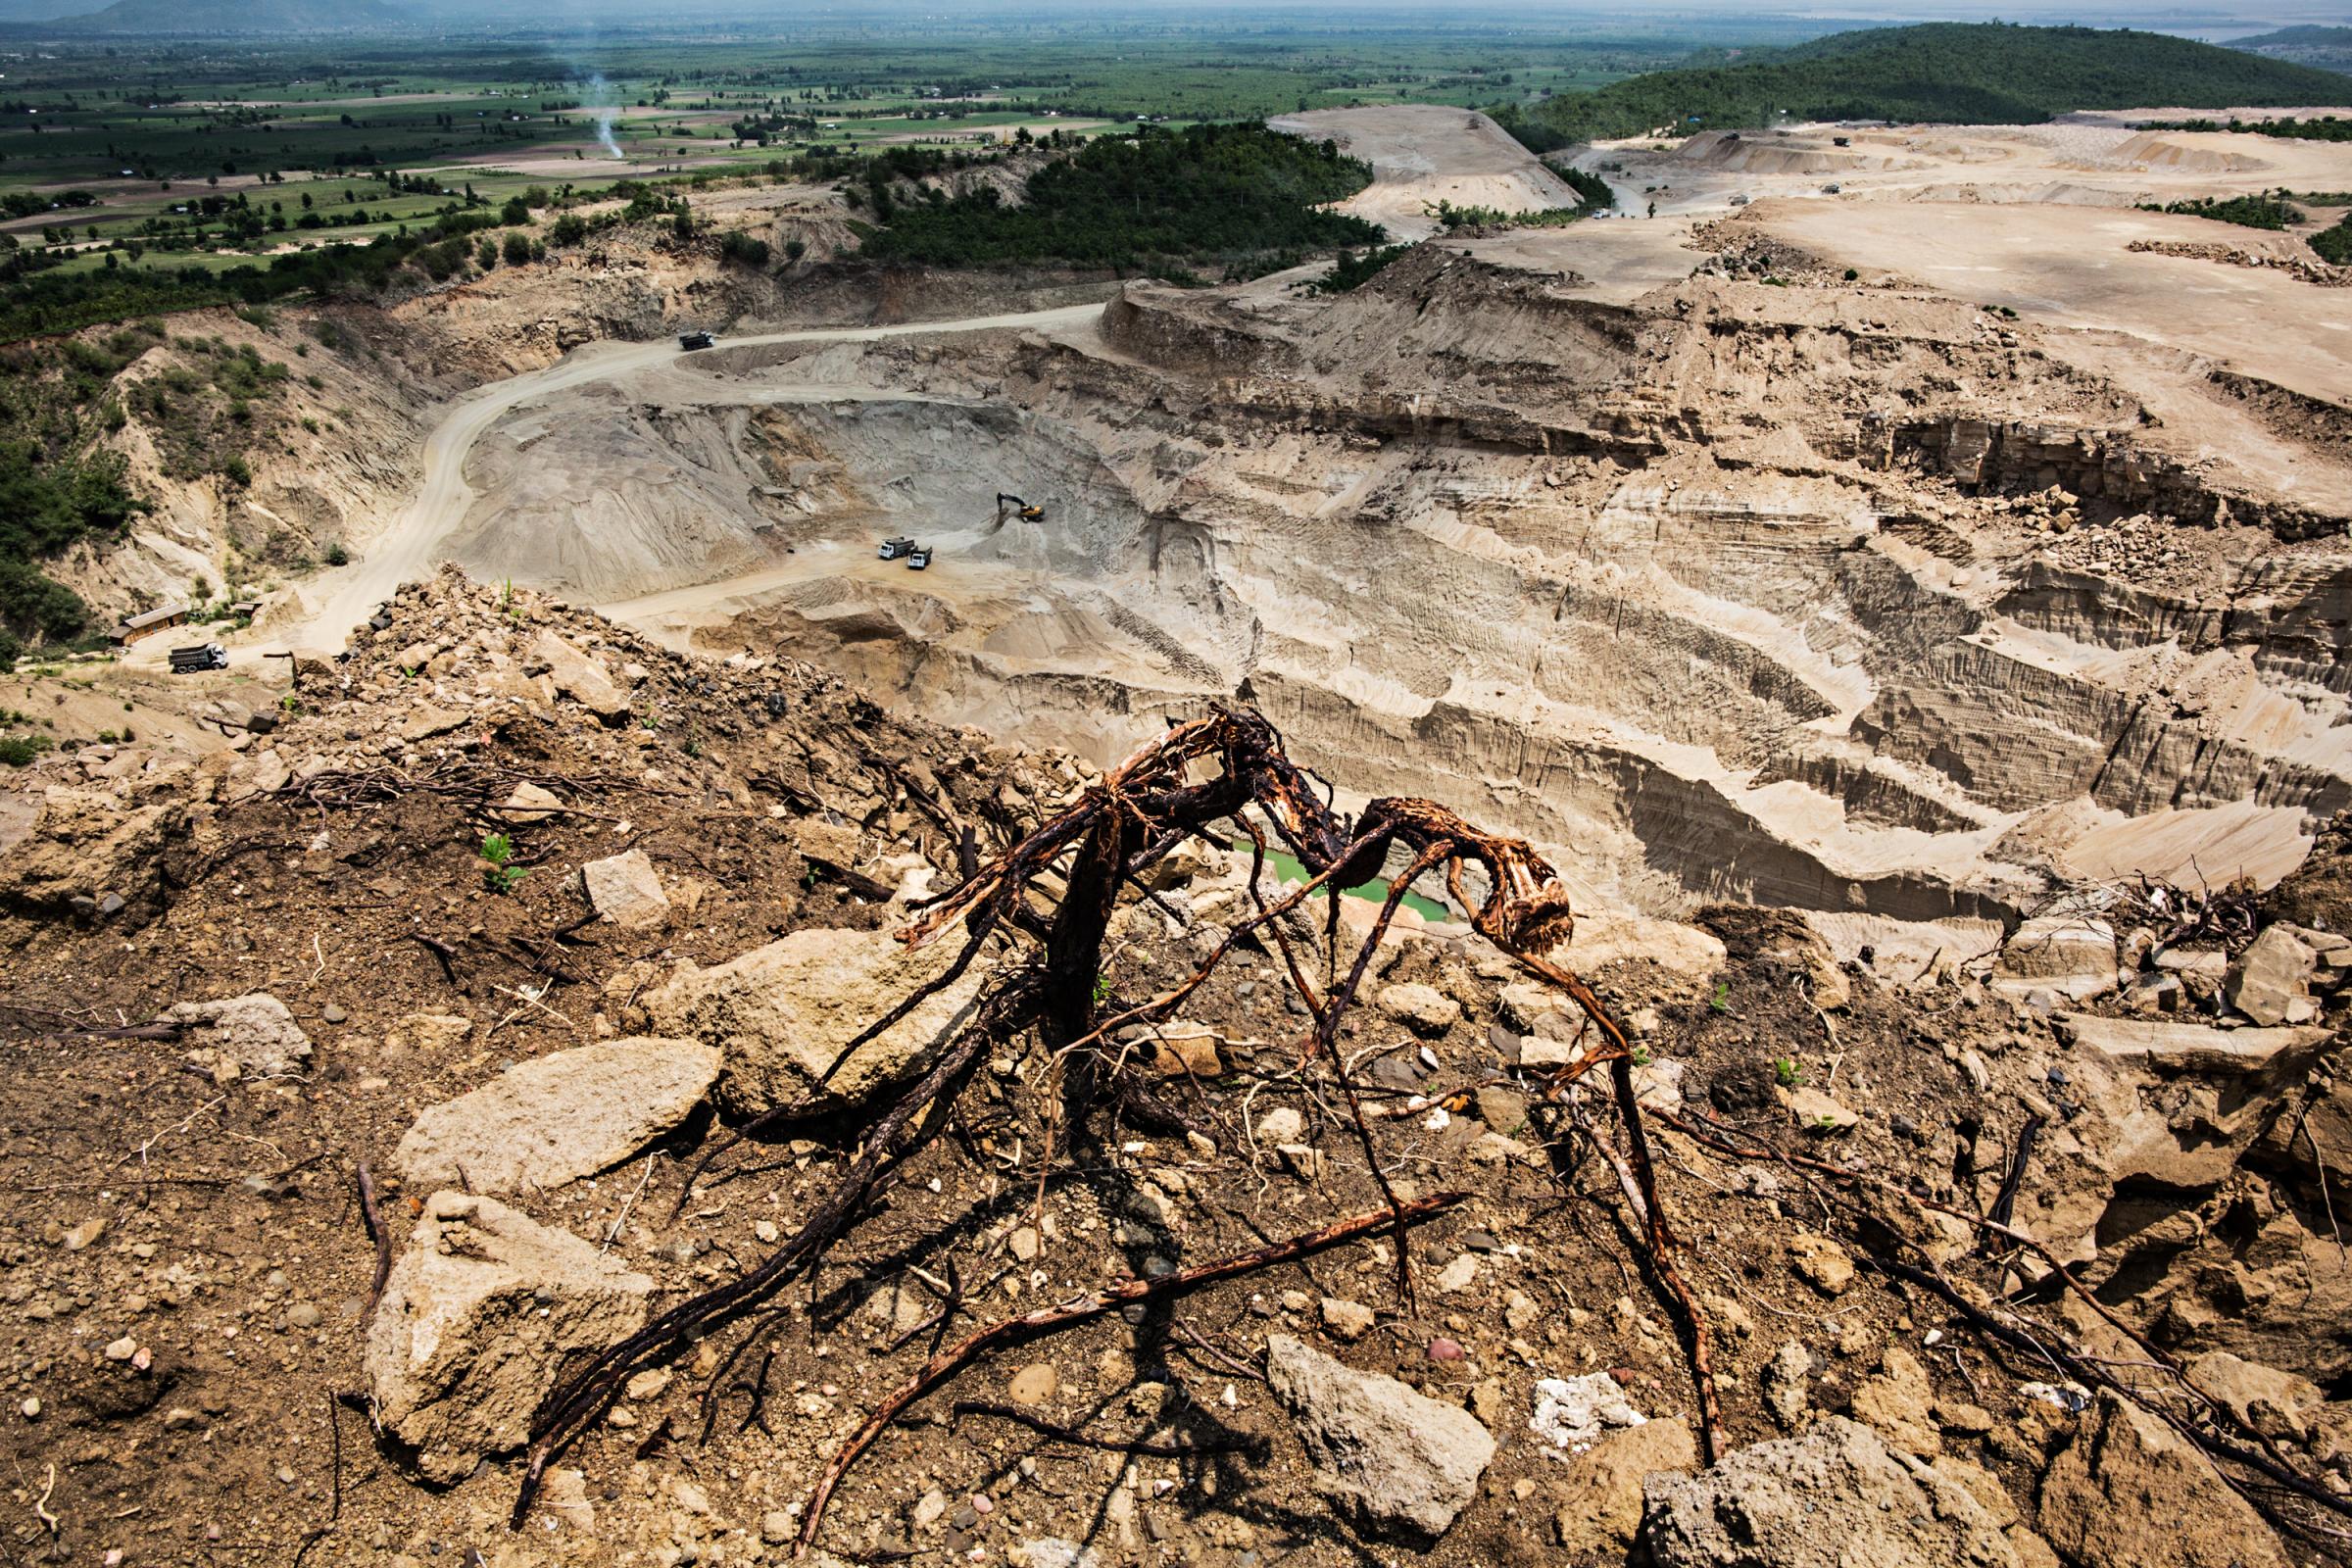 Singles - An open-pit mine, operated by Thaidi Aung Swe Moe...